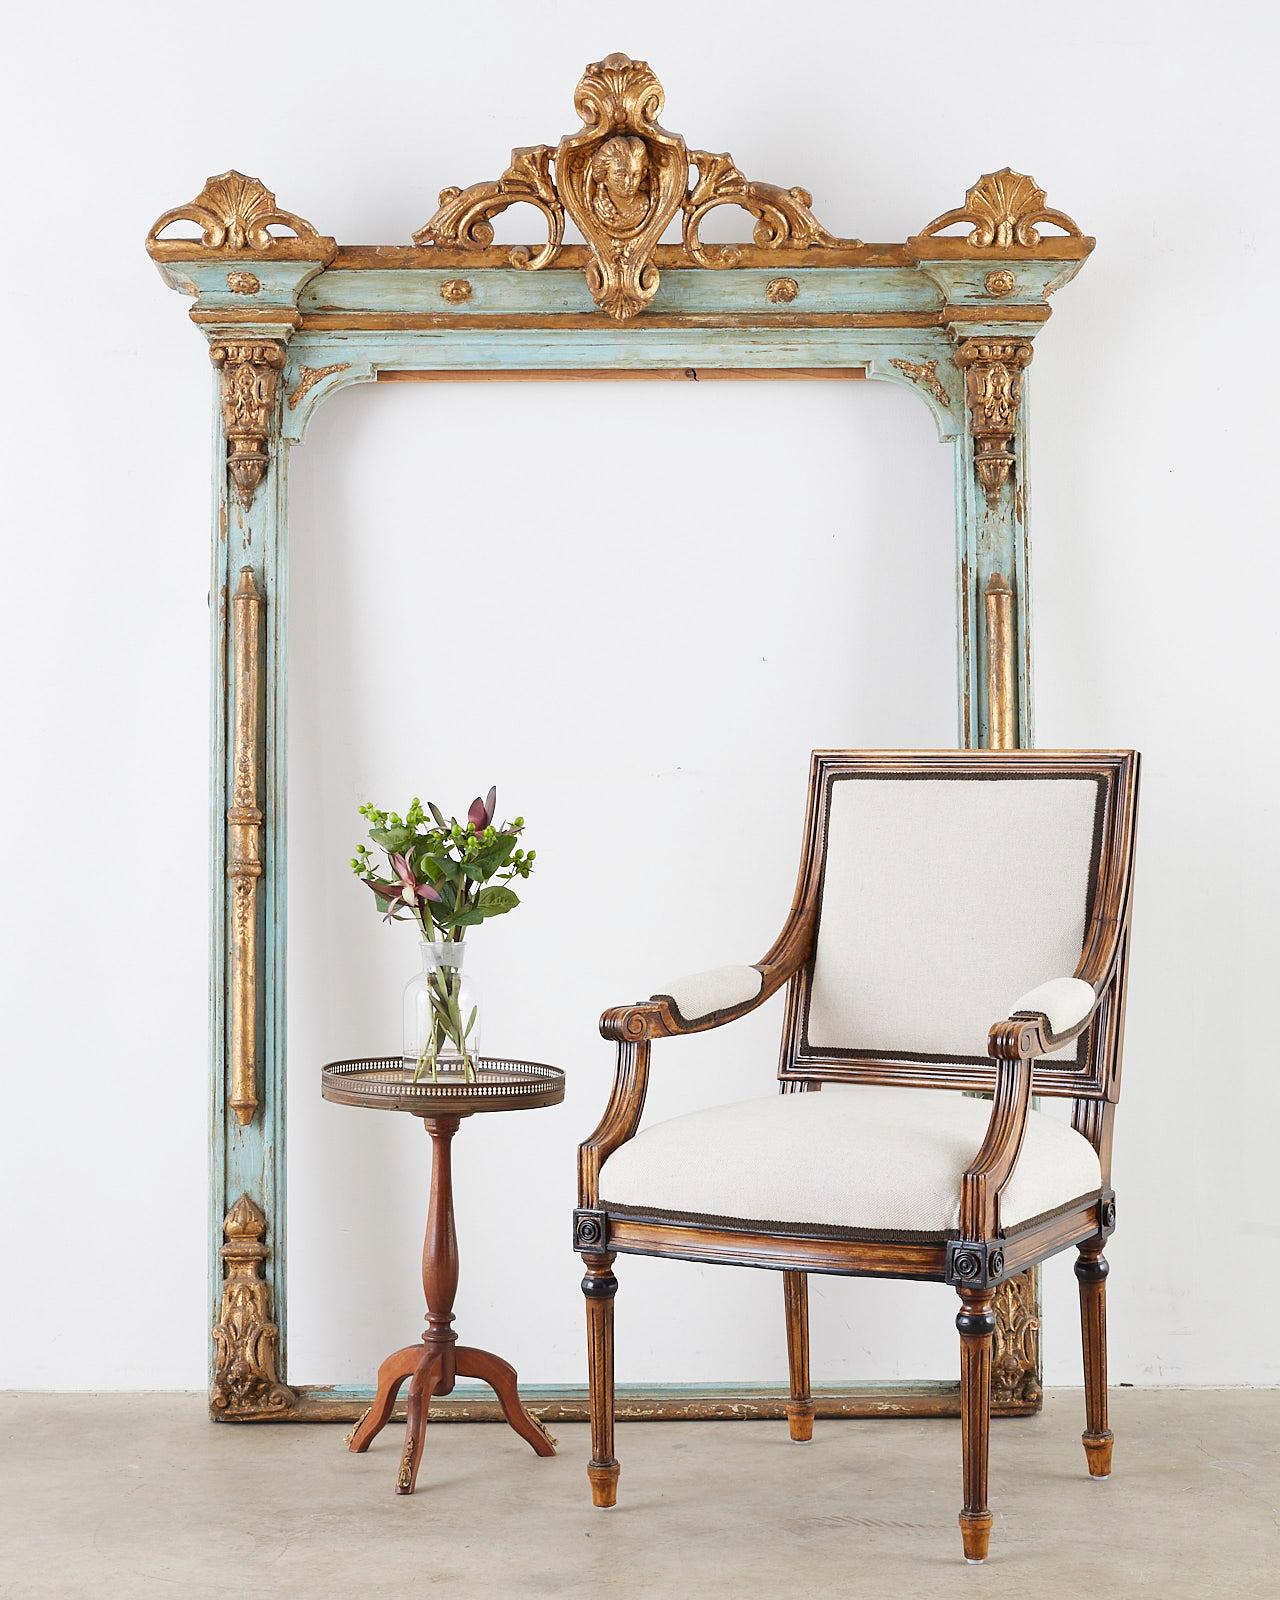 Opulent mid to late 19th century Venetian mirror frame or picture frame. Features a parcel gilt and sea foam green painted rectangular form. The grand gilt carved central mount includes acanthus scrolls with palmette and rocaille motifs. Centered by